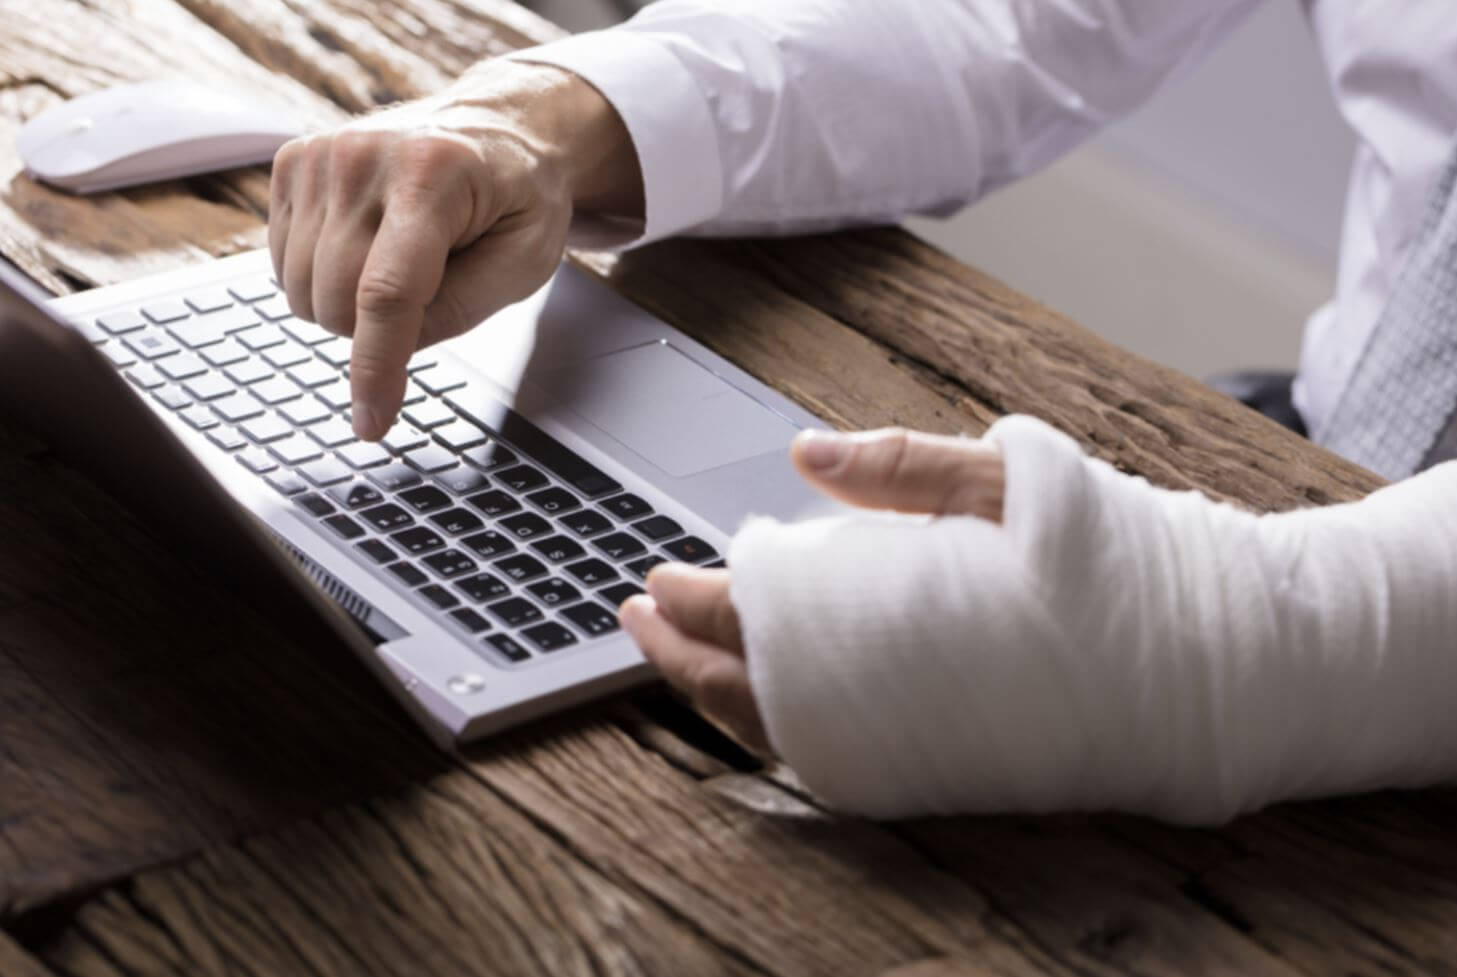 Common Personal Injury Questions